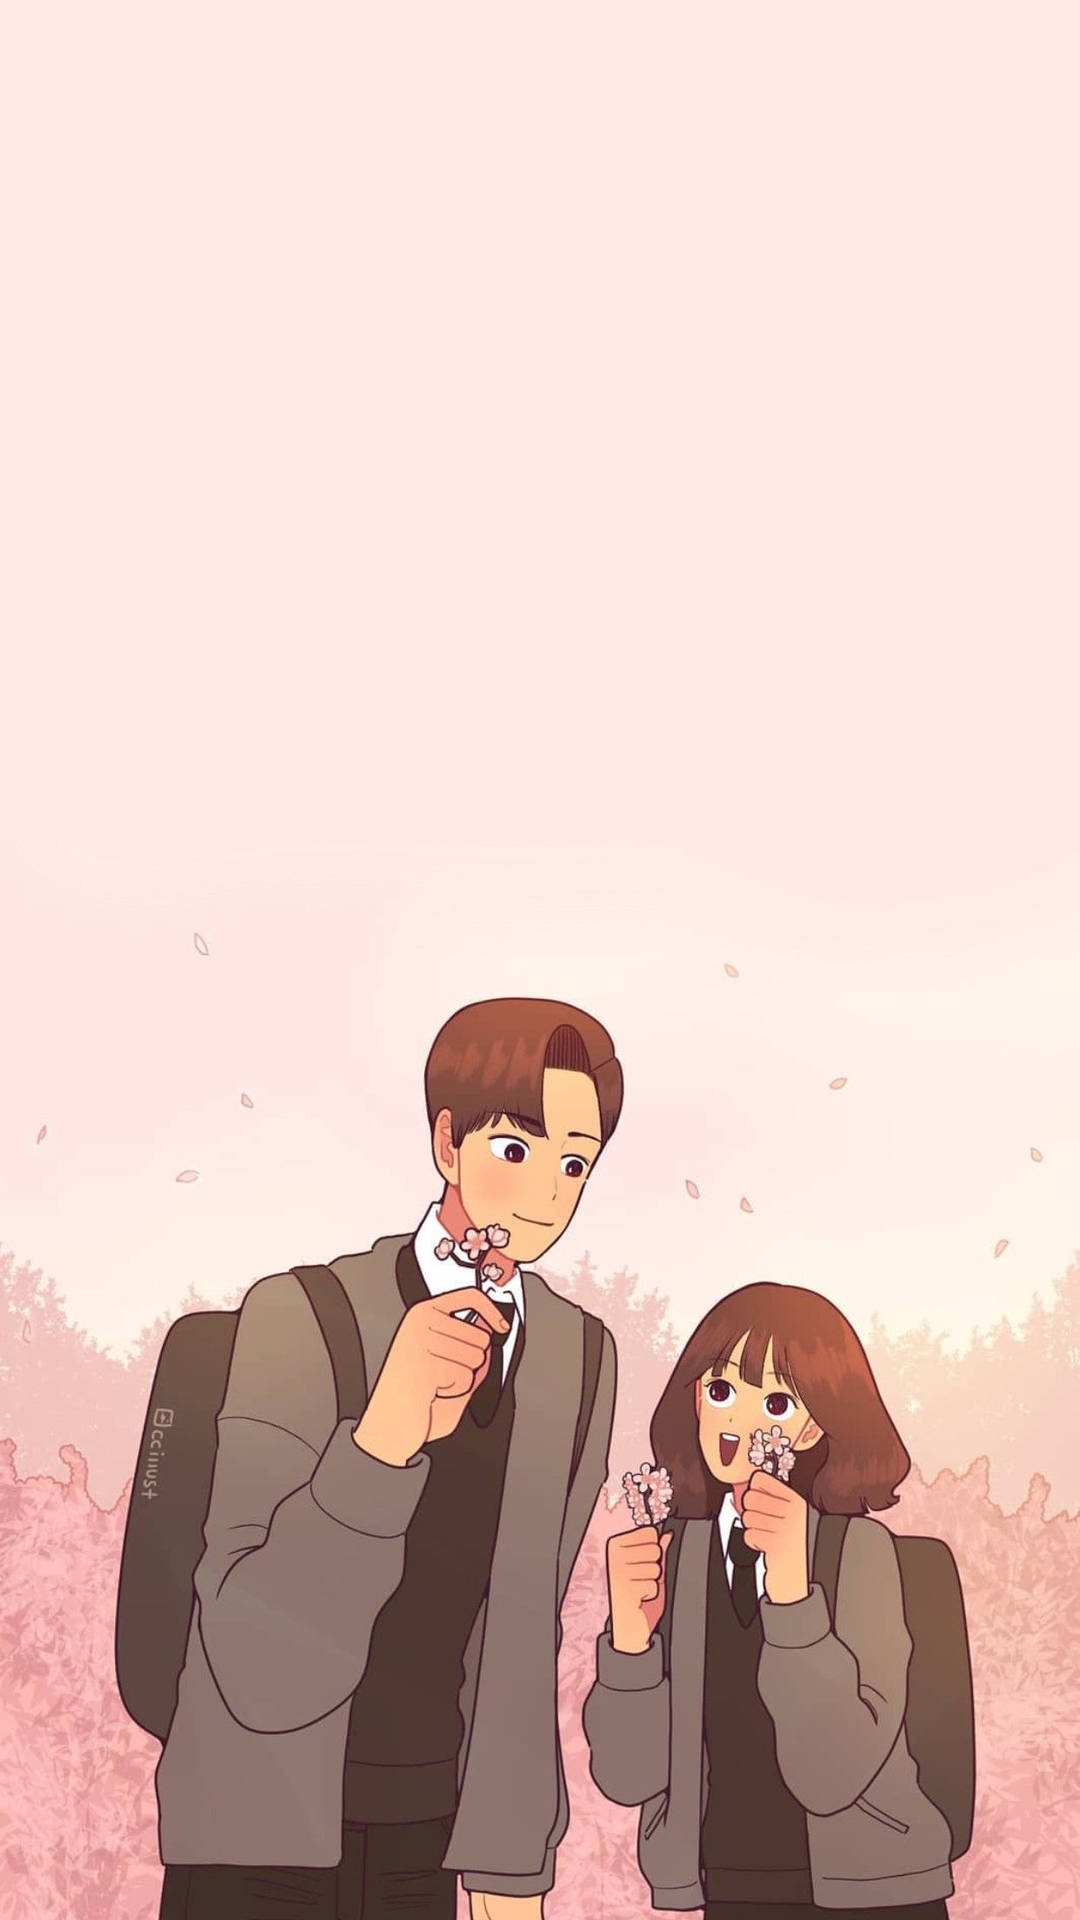 Cute Cartoon Couple Holding Cherry Blossoms Background